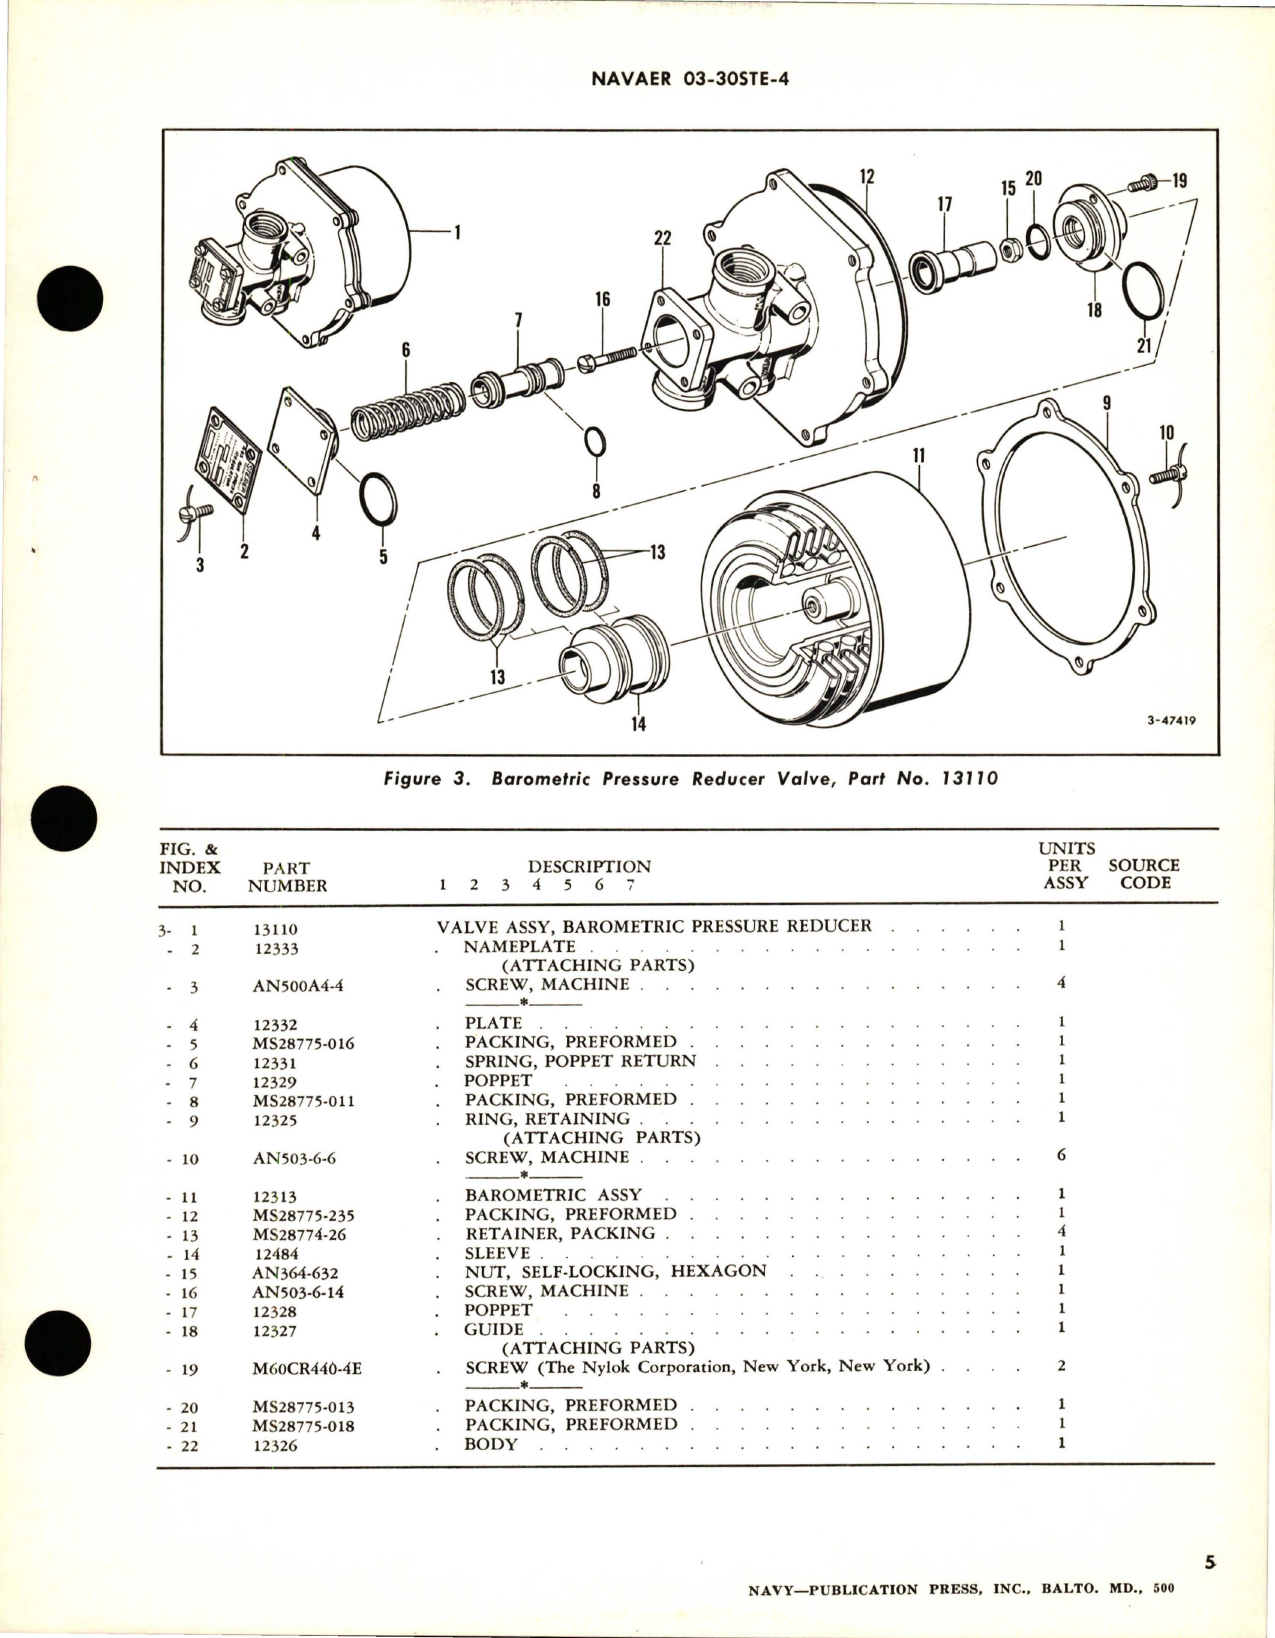 Sample page 5 from AirCorps Library document: Overhaul Instructions with Parts Breakdown for Barometric Pressure Reducer Valve - Part 13110